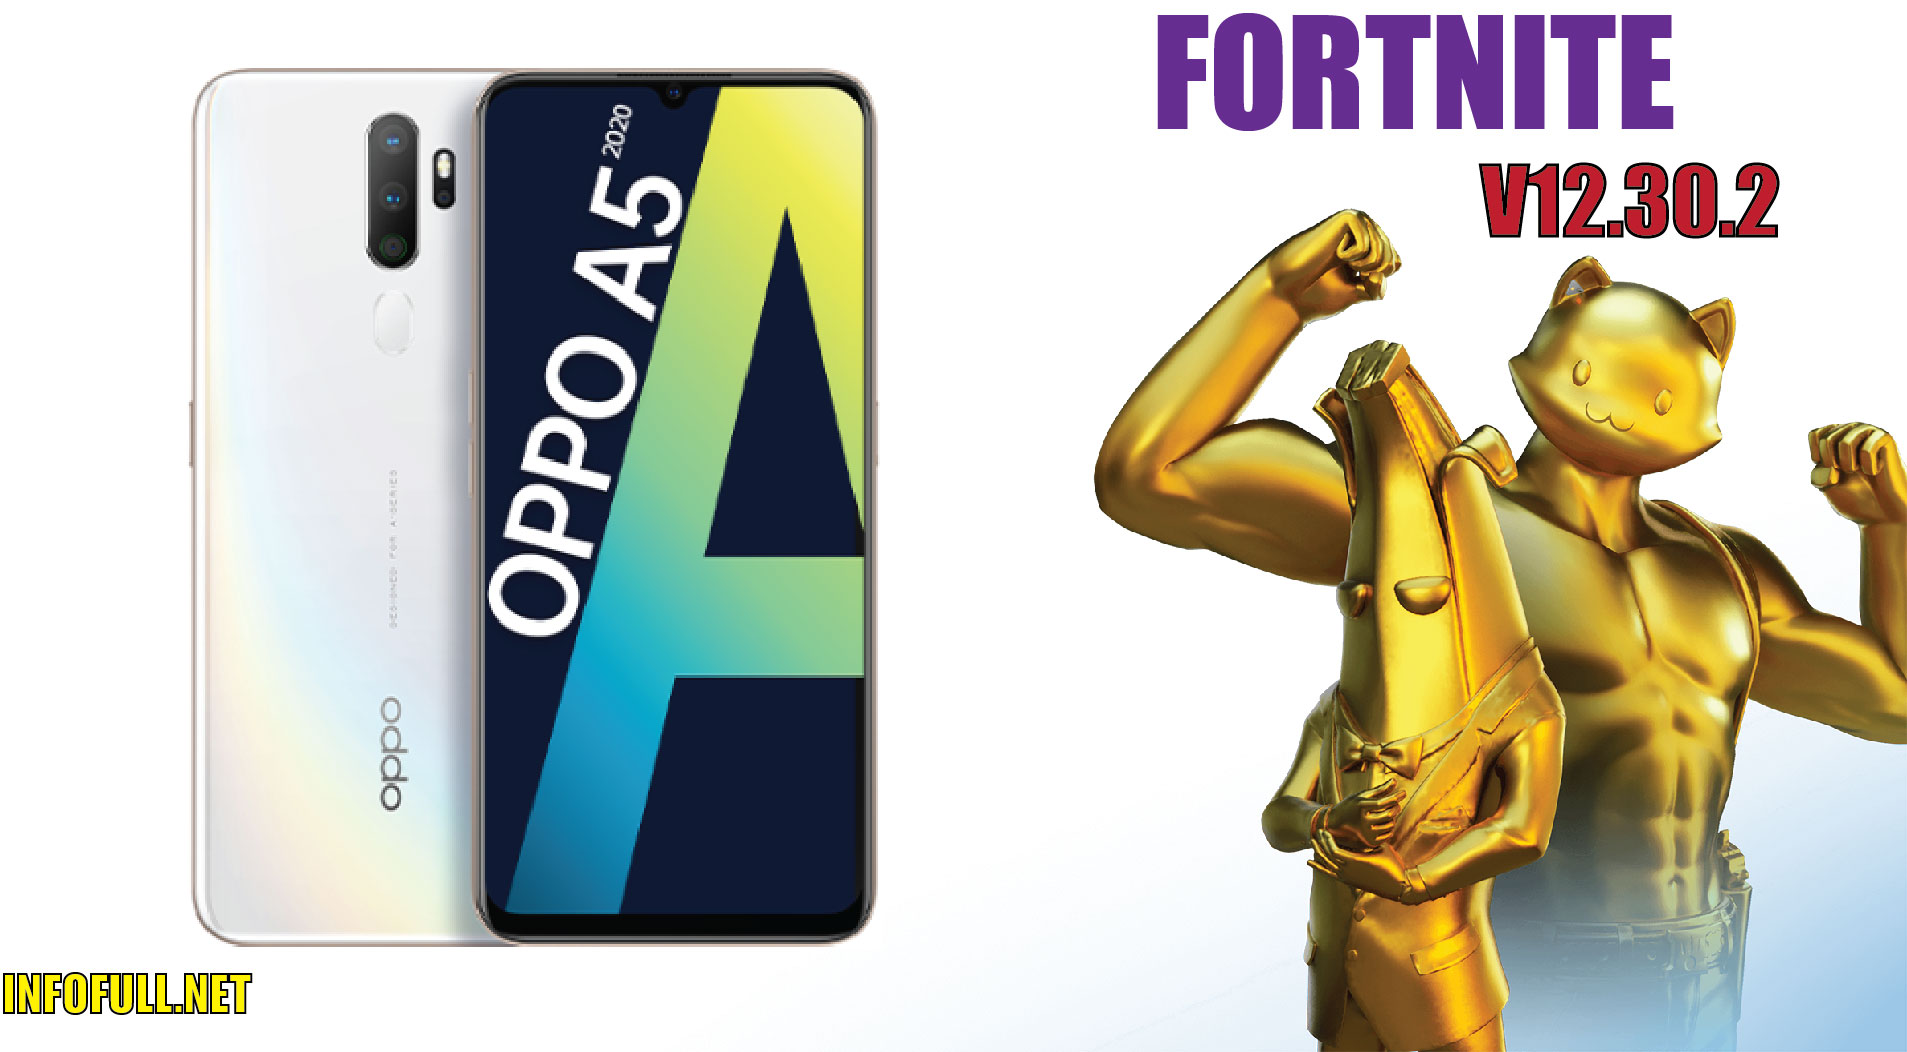 How to install Fortnite Apk Fix Device not supported for ...